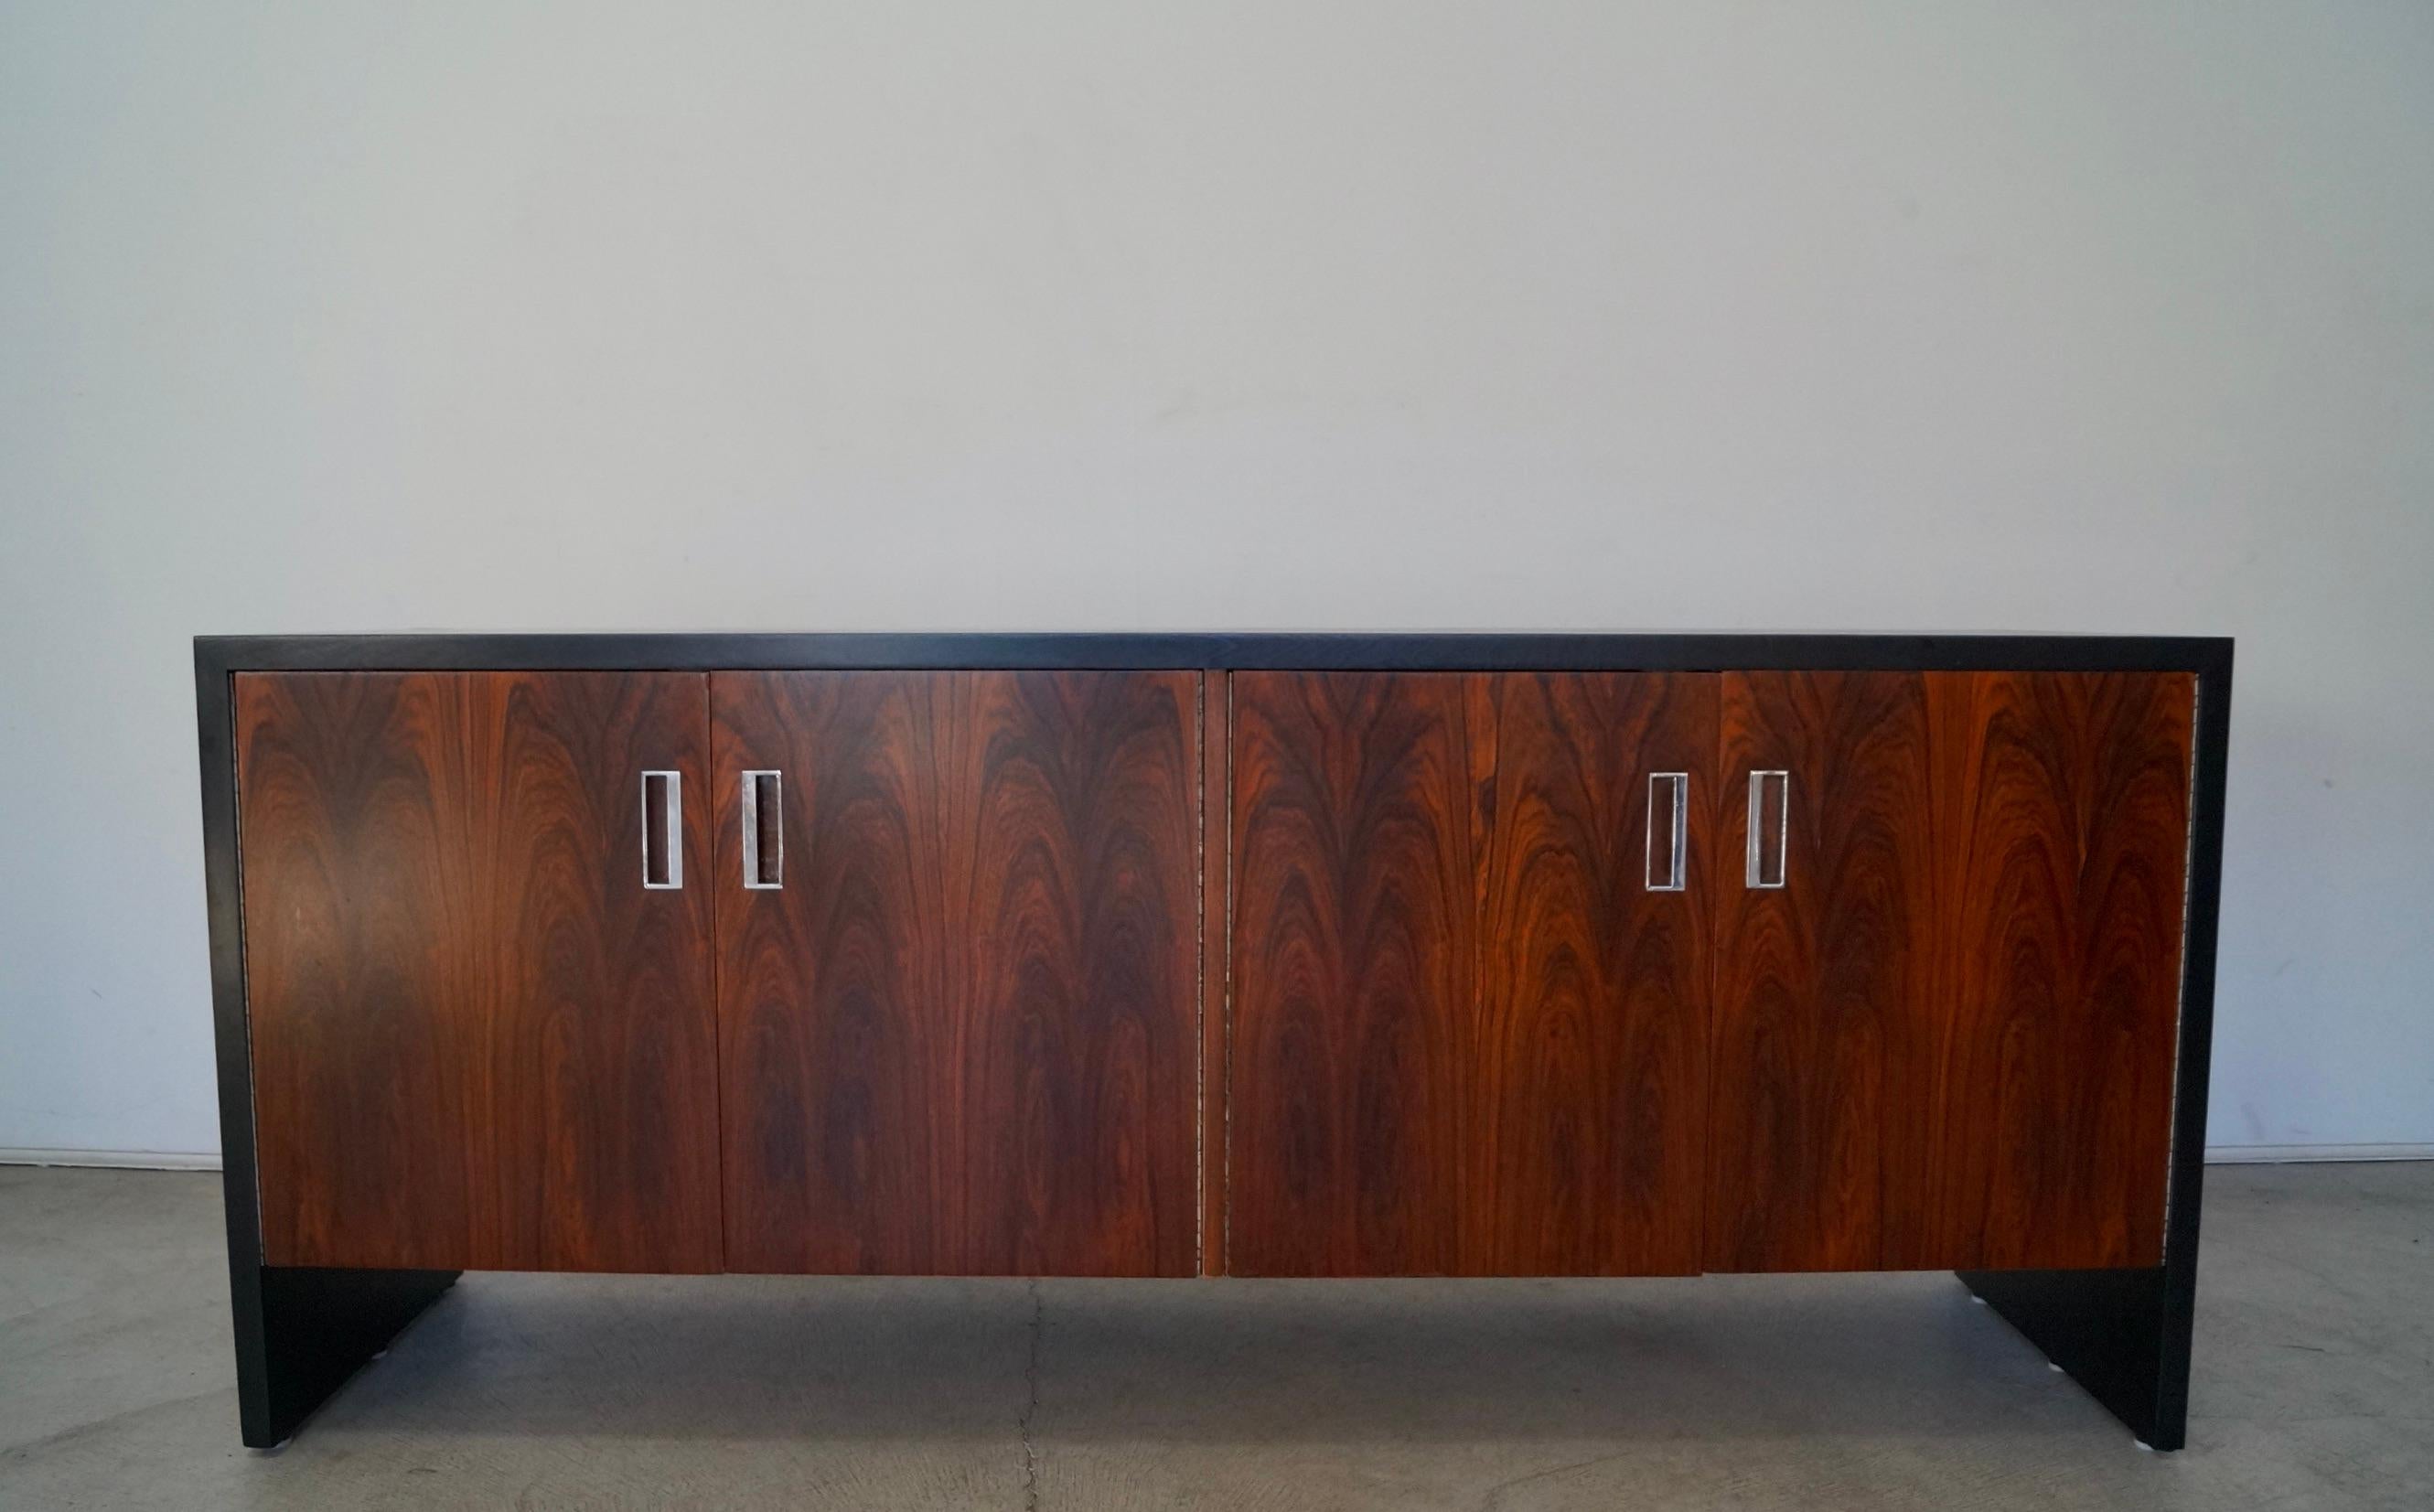 1970's Mid-Century Modern Robert Baron Rosewood Credenza / Sideboard In Excellent Condition For Sale In Burbank, CA